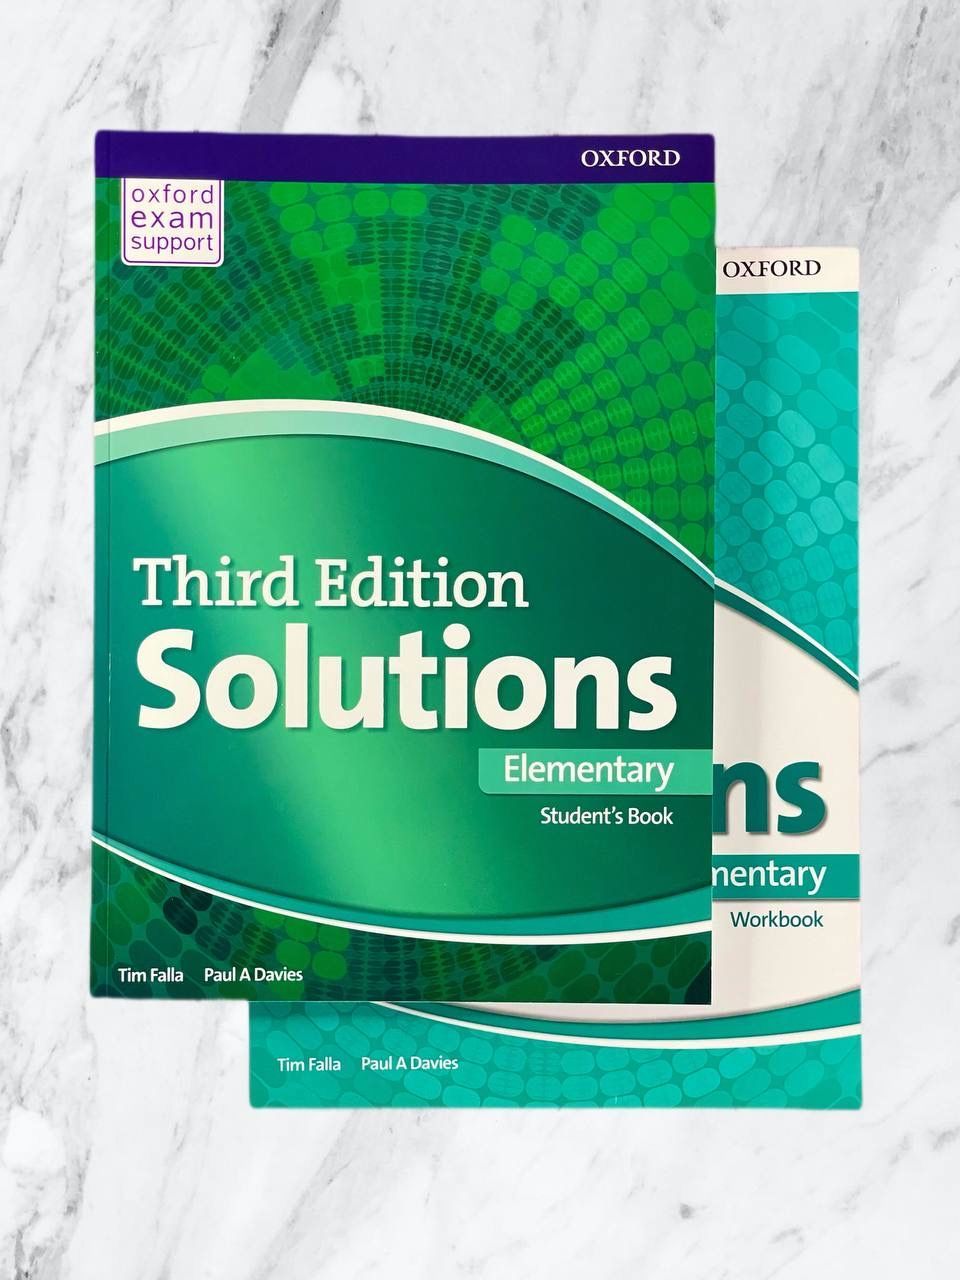 Solution elementary students book 3rd edition. Solutions Elementary 3rd Edition. Solutions Elementary student's book. Third Edition solutions Elementary Workbook. Solutions Elementary 3rd Edition student's book.